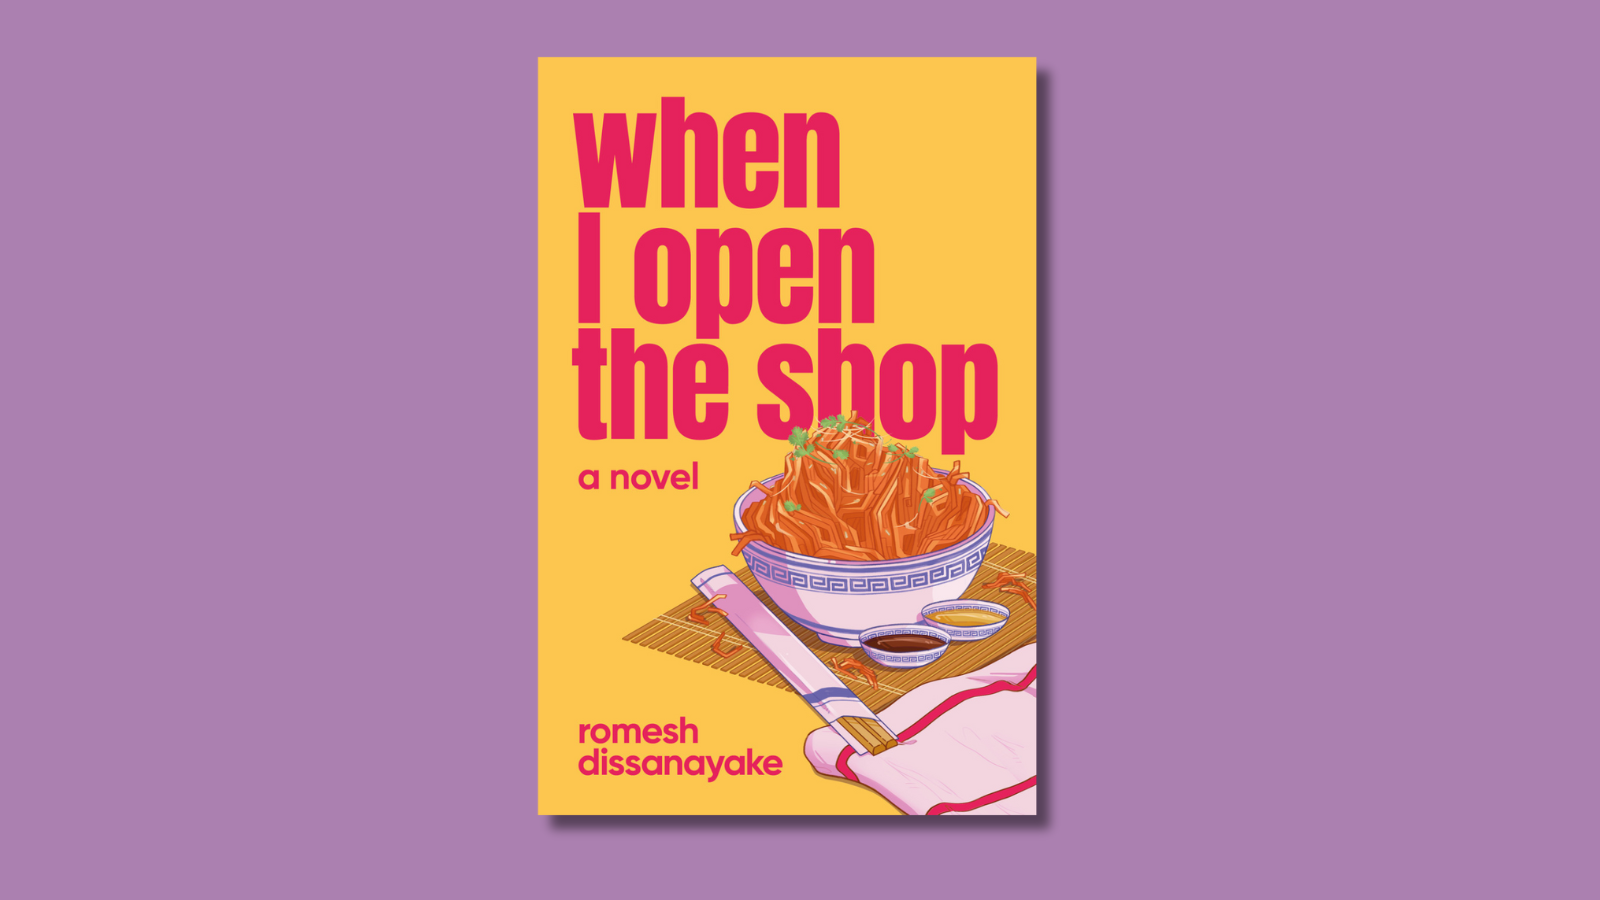 When I open the shop by romesh dissanayake